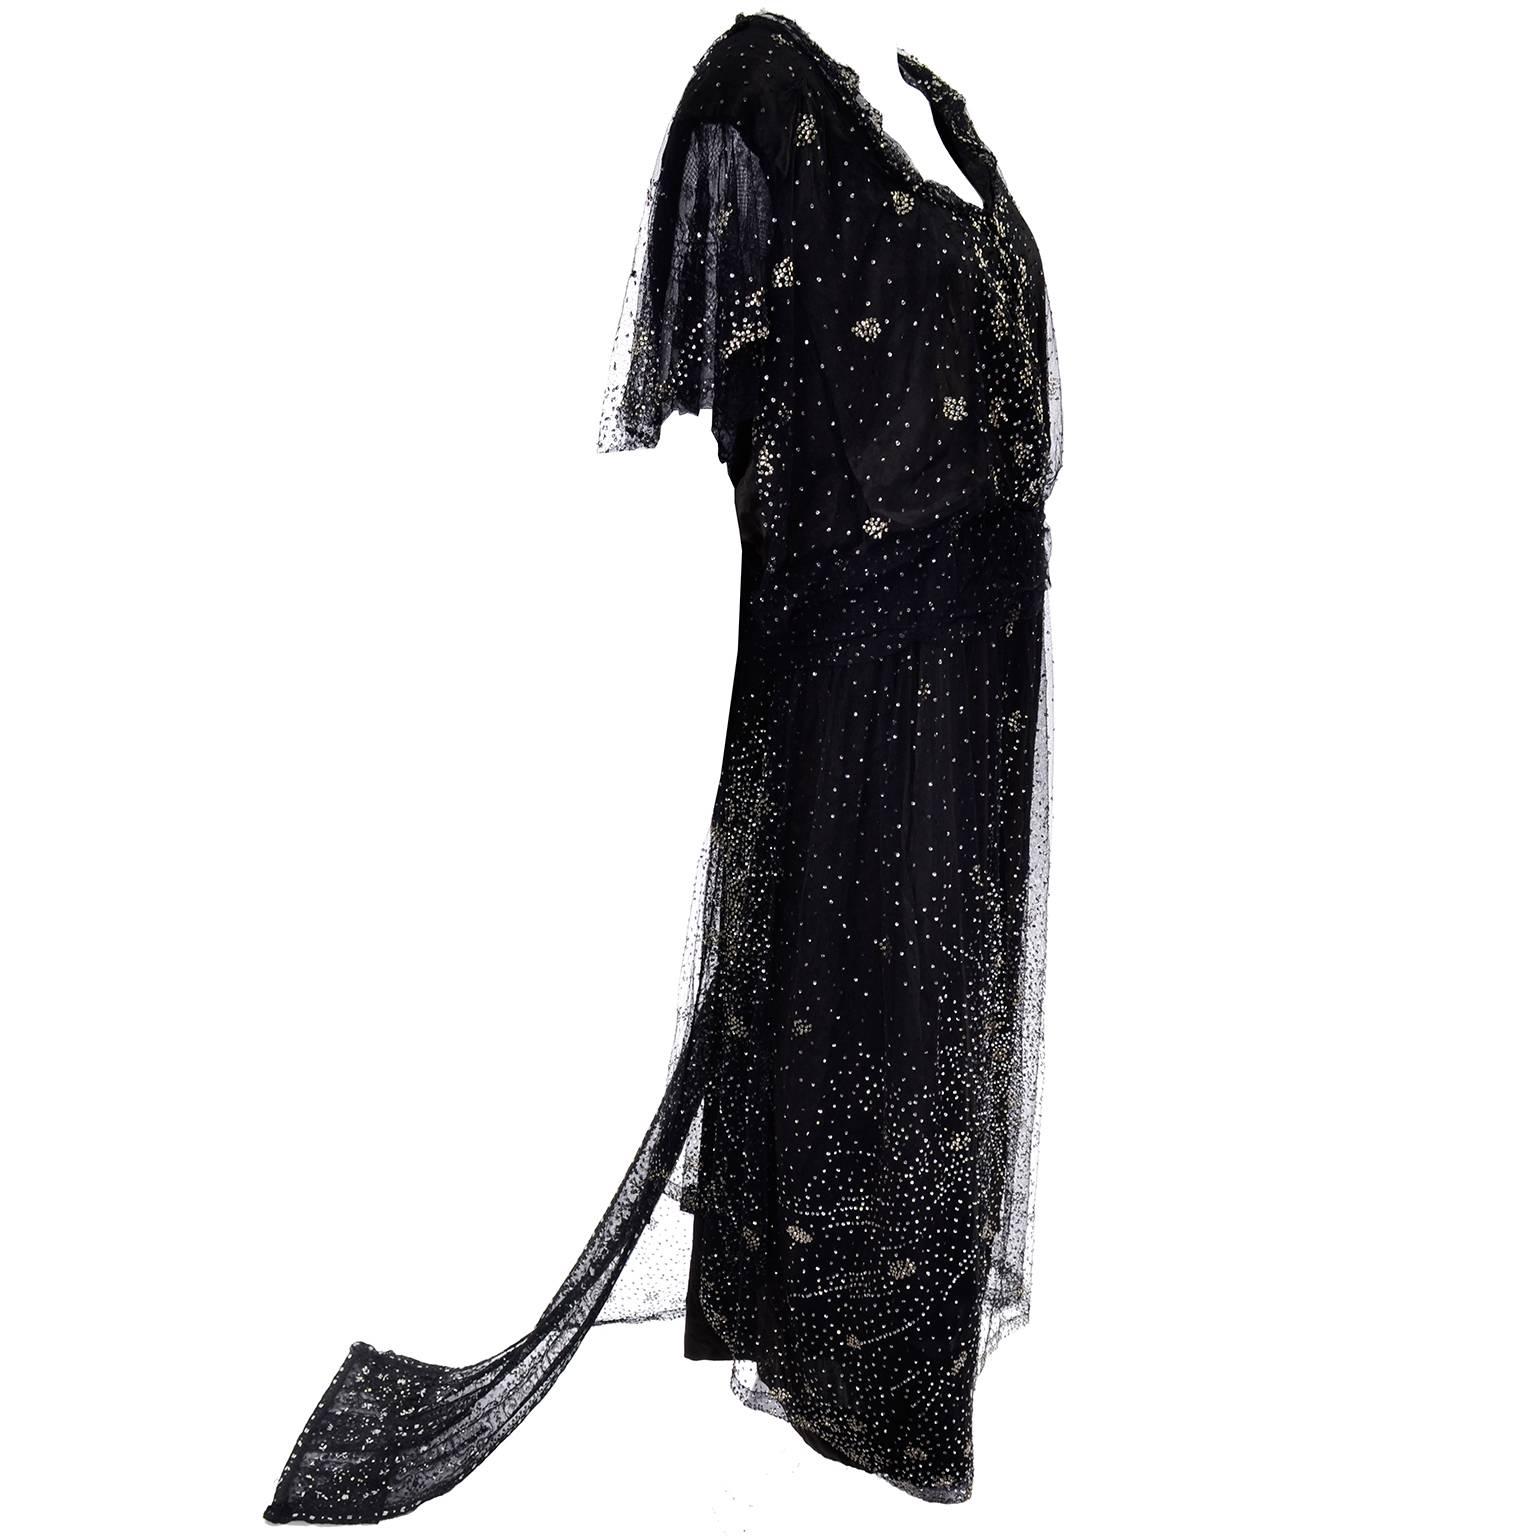 This is an absolutely incredible Edwardian dress with silver sequins and beads covering the black lace outer layer and creating a firework starburst design on the front. The waist is fitted with an interior hook and eye strap, but the rest is